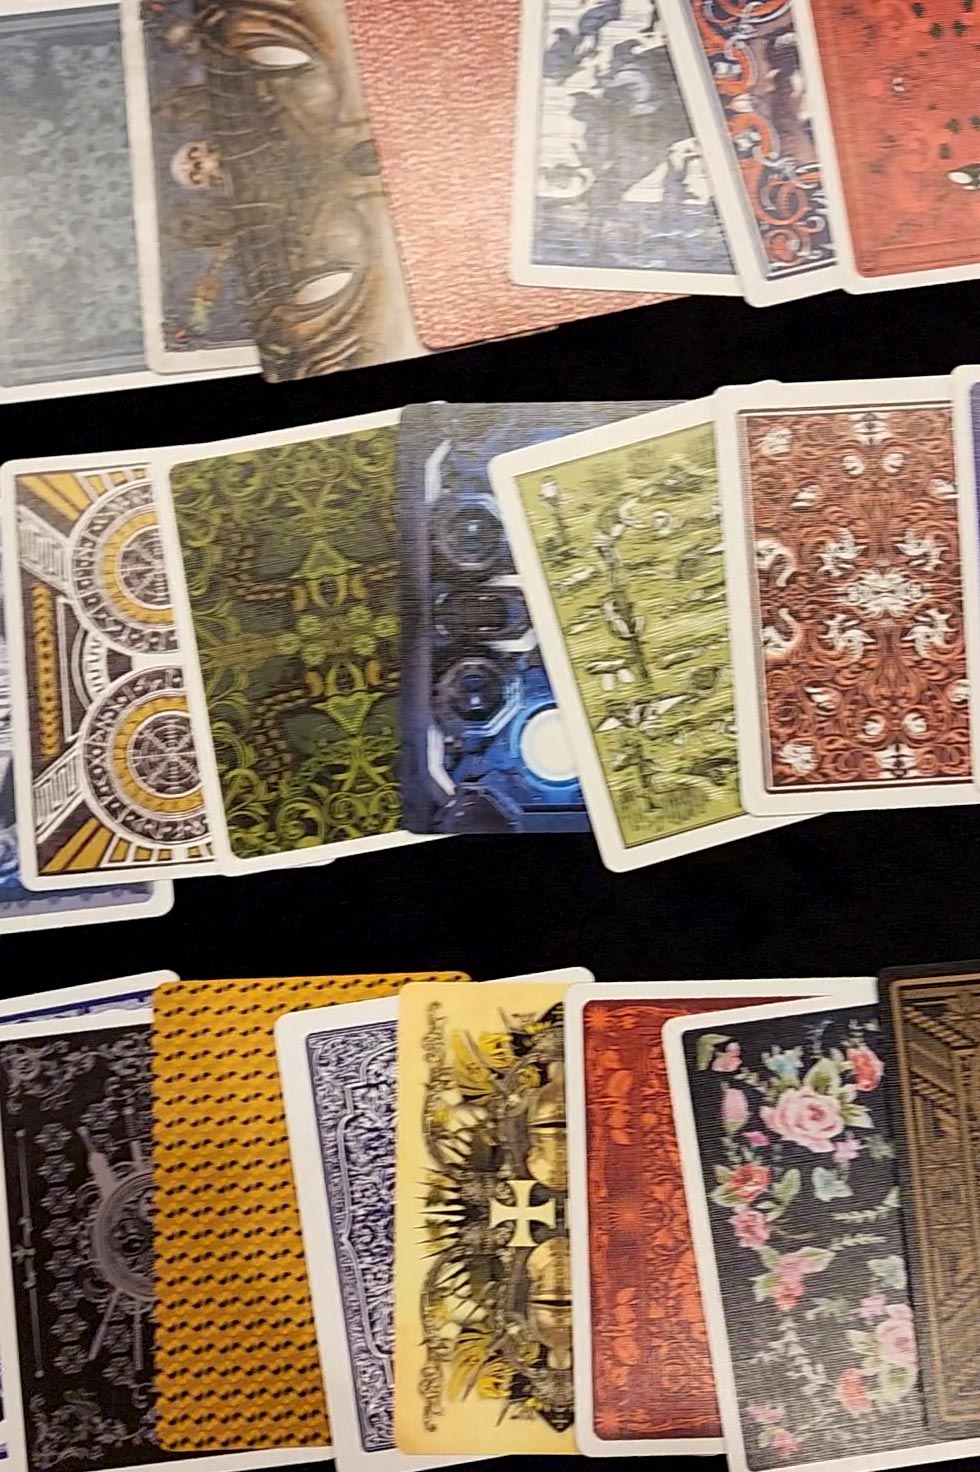 The Most Unique Deck of Playing Cards!